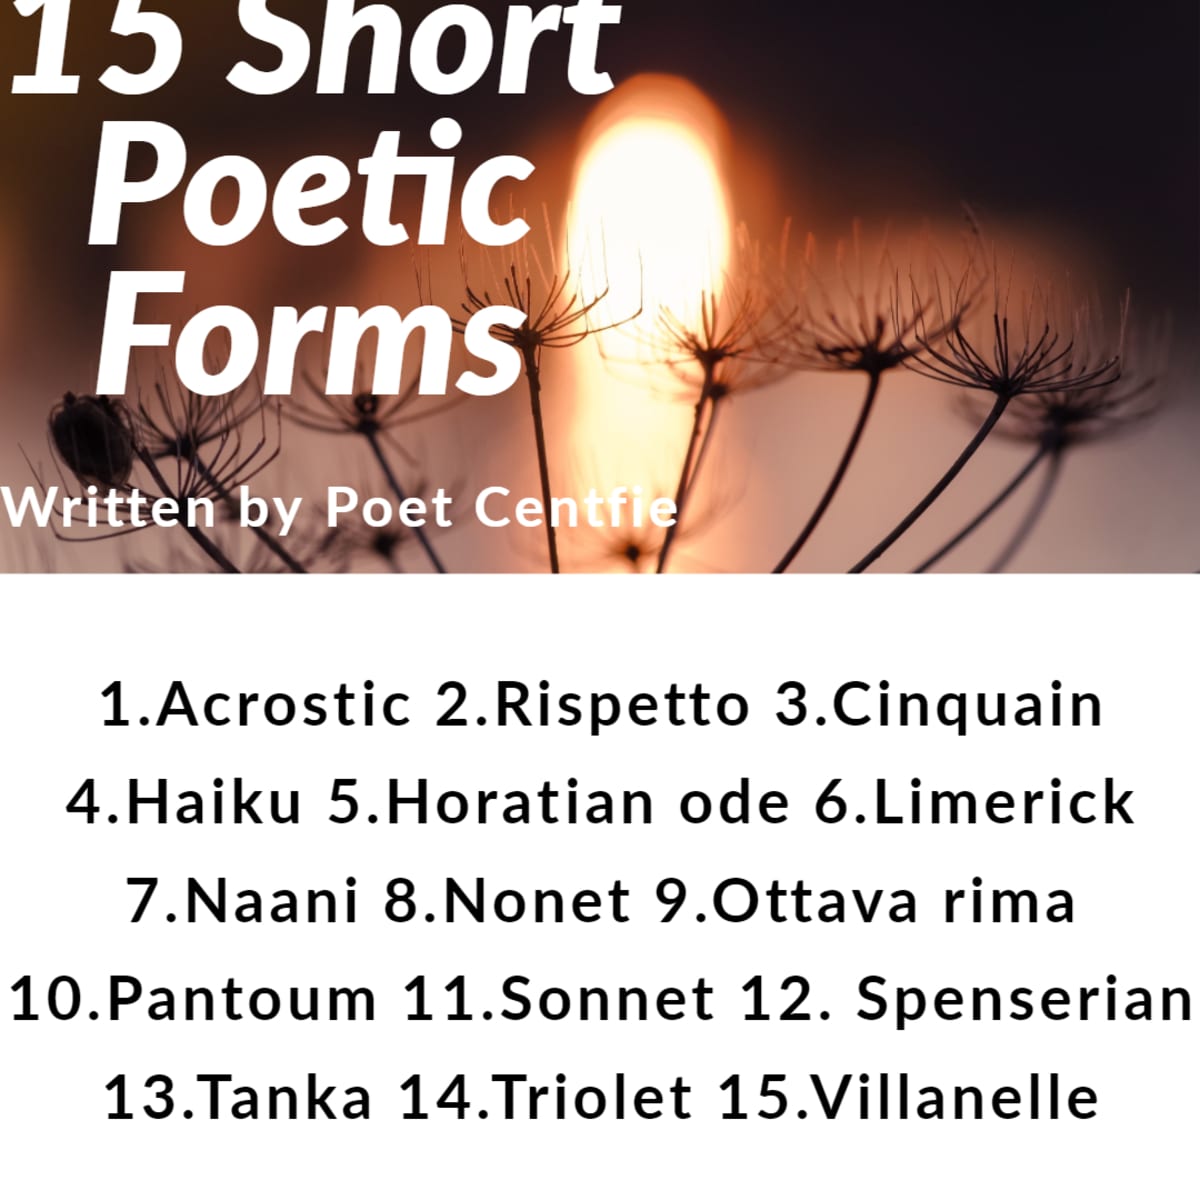 7 Types of Short Poetic Forms With Examples - Owlcation